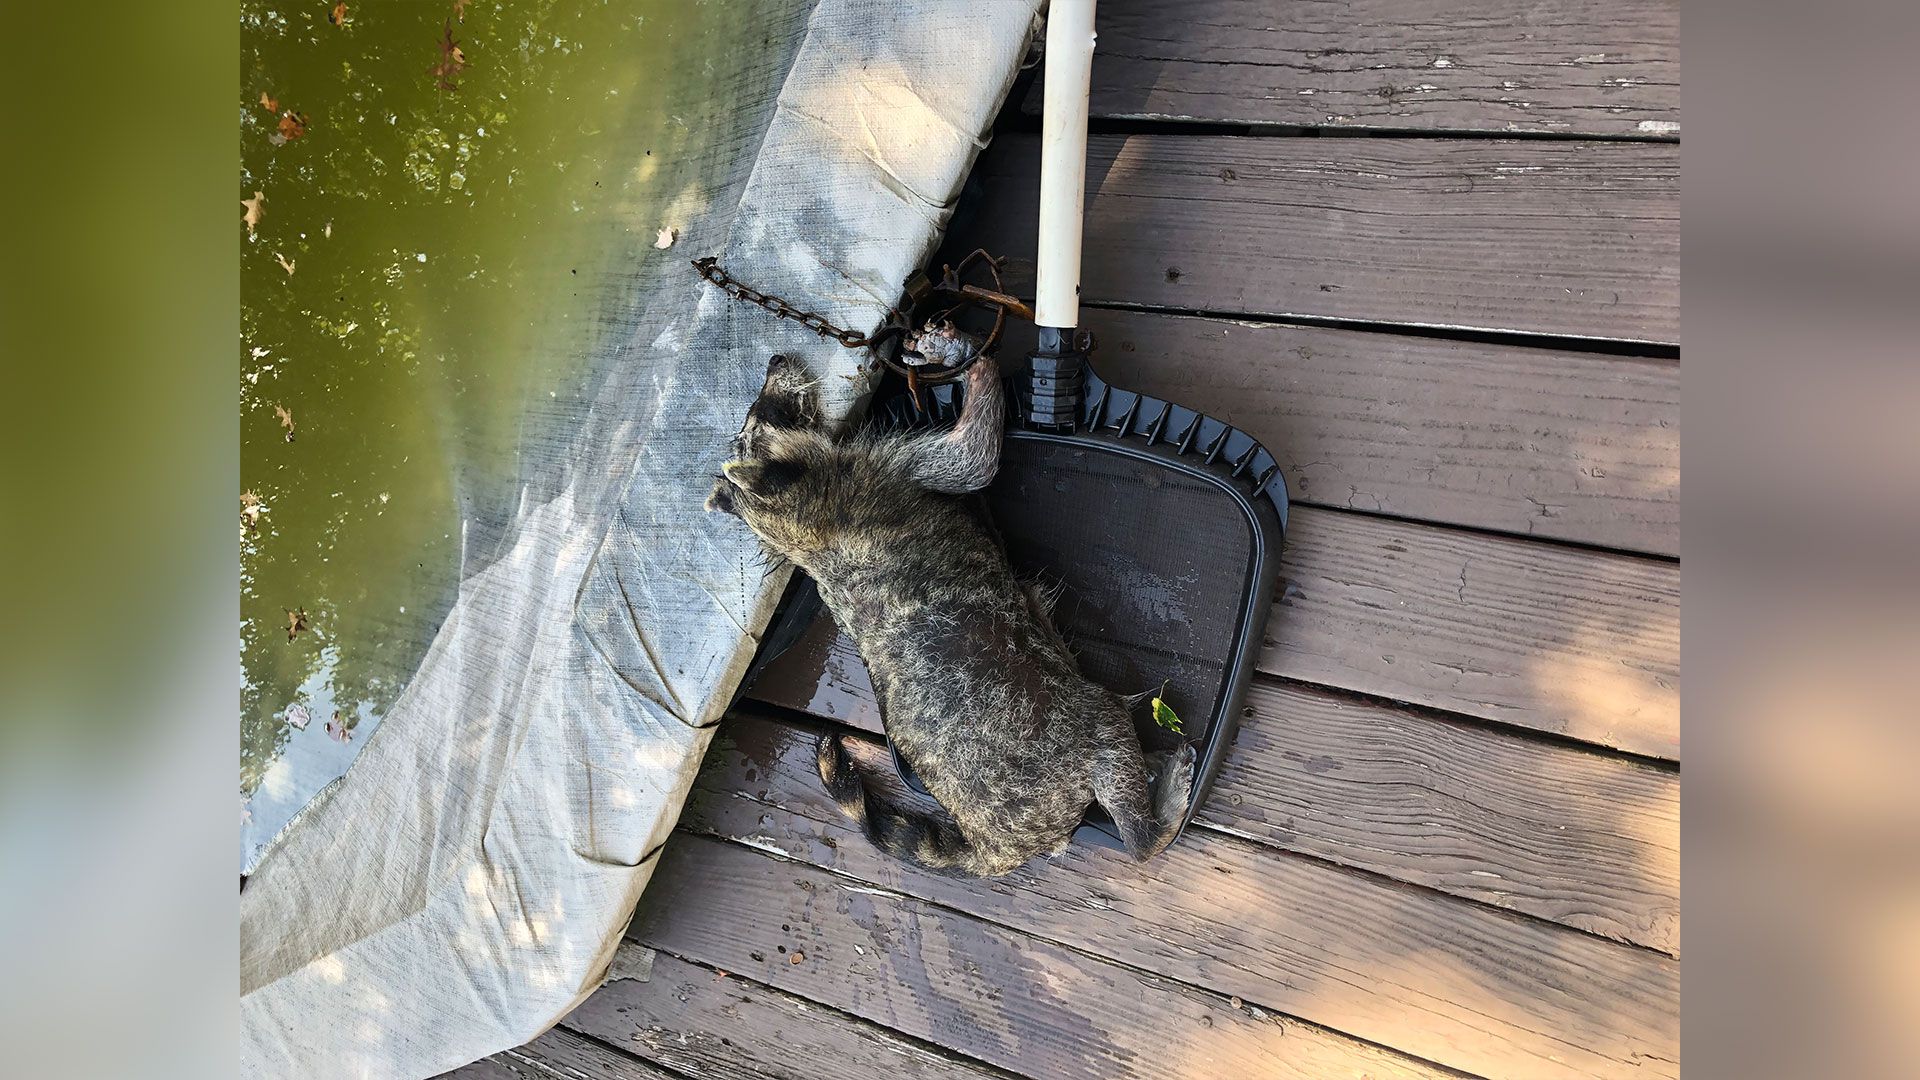 Concord woman says this trap used to snare raccoon is 'inhumane